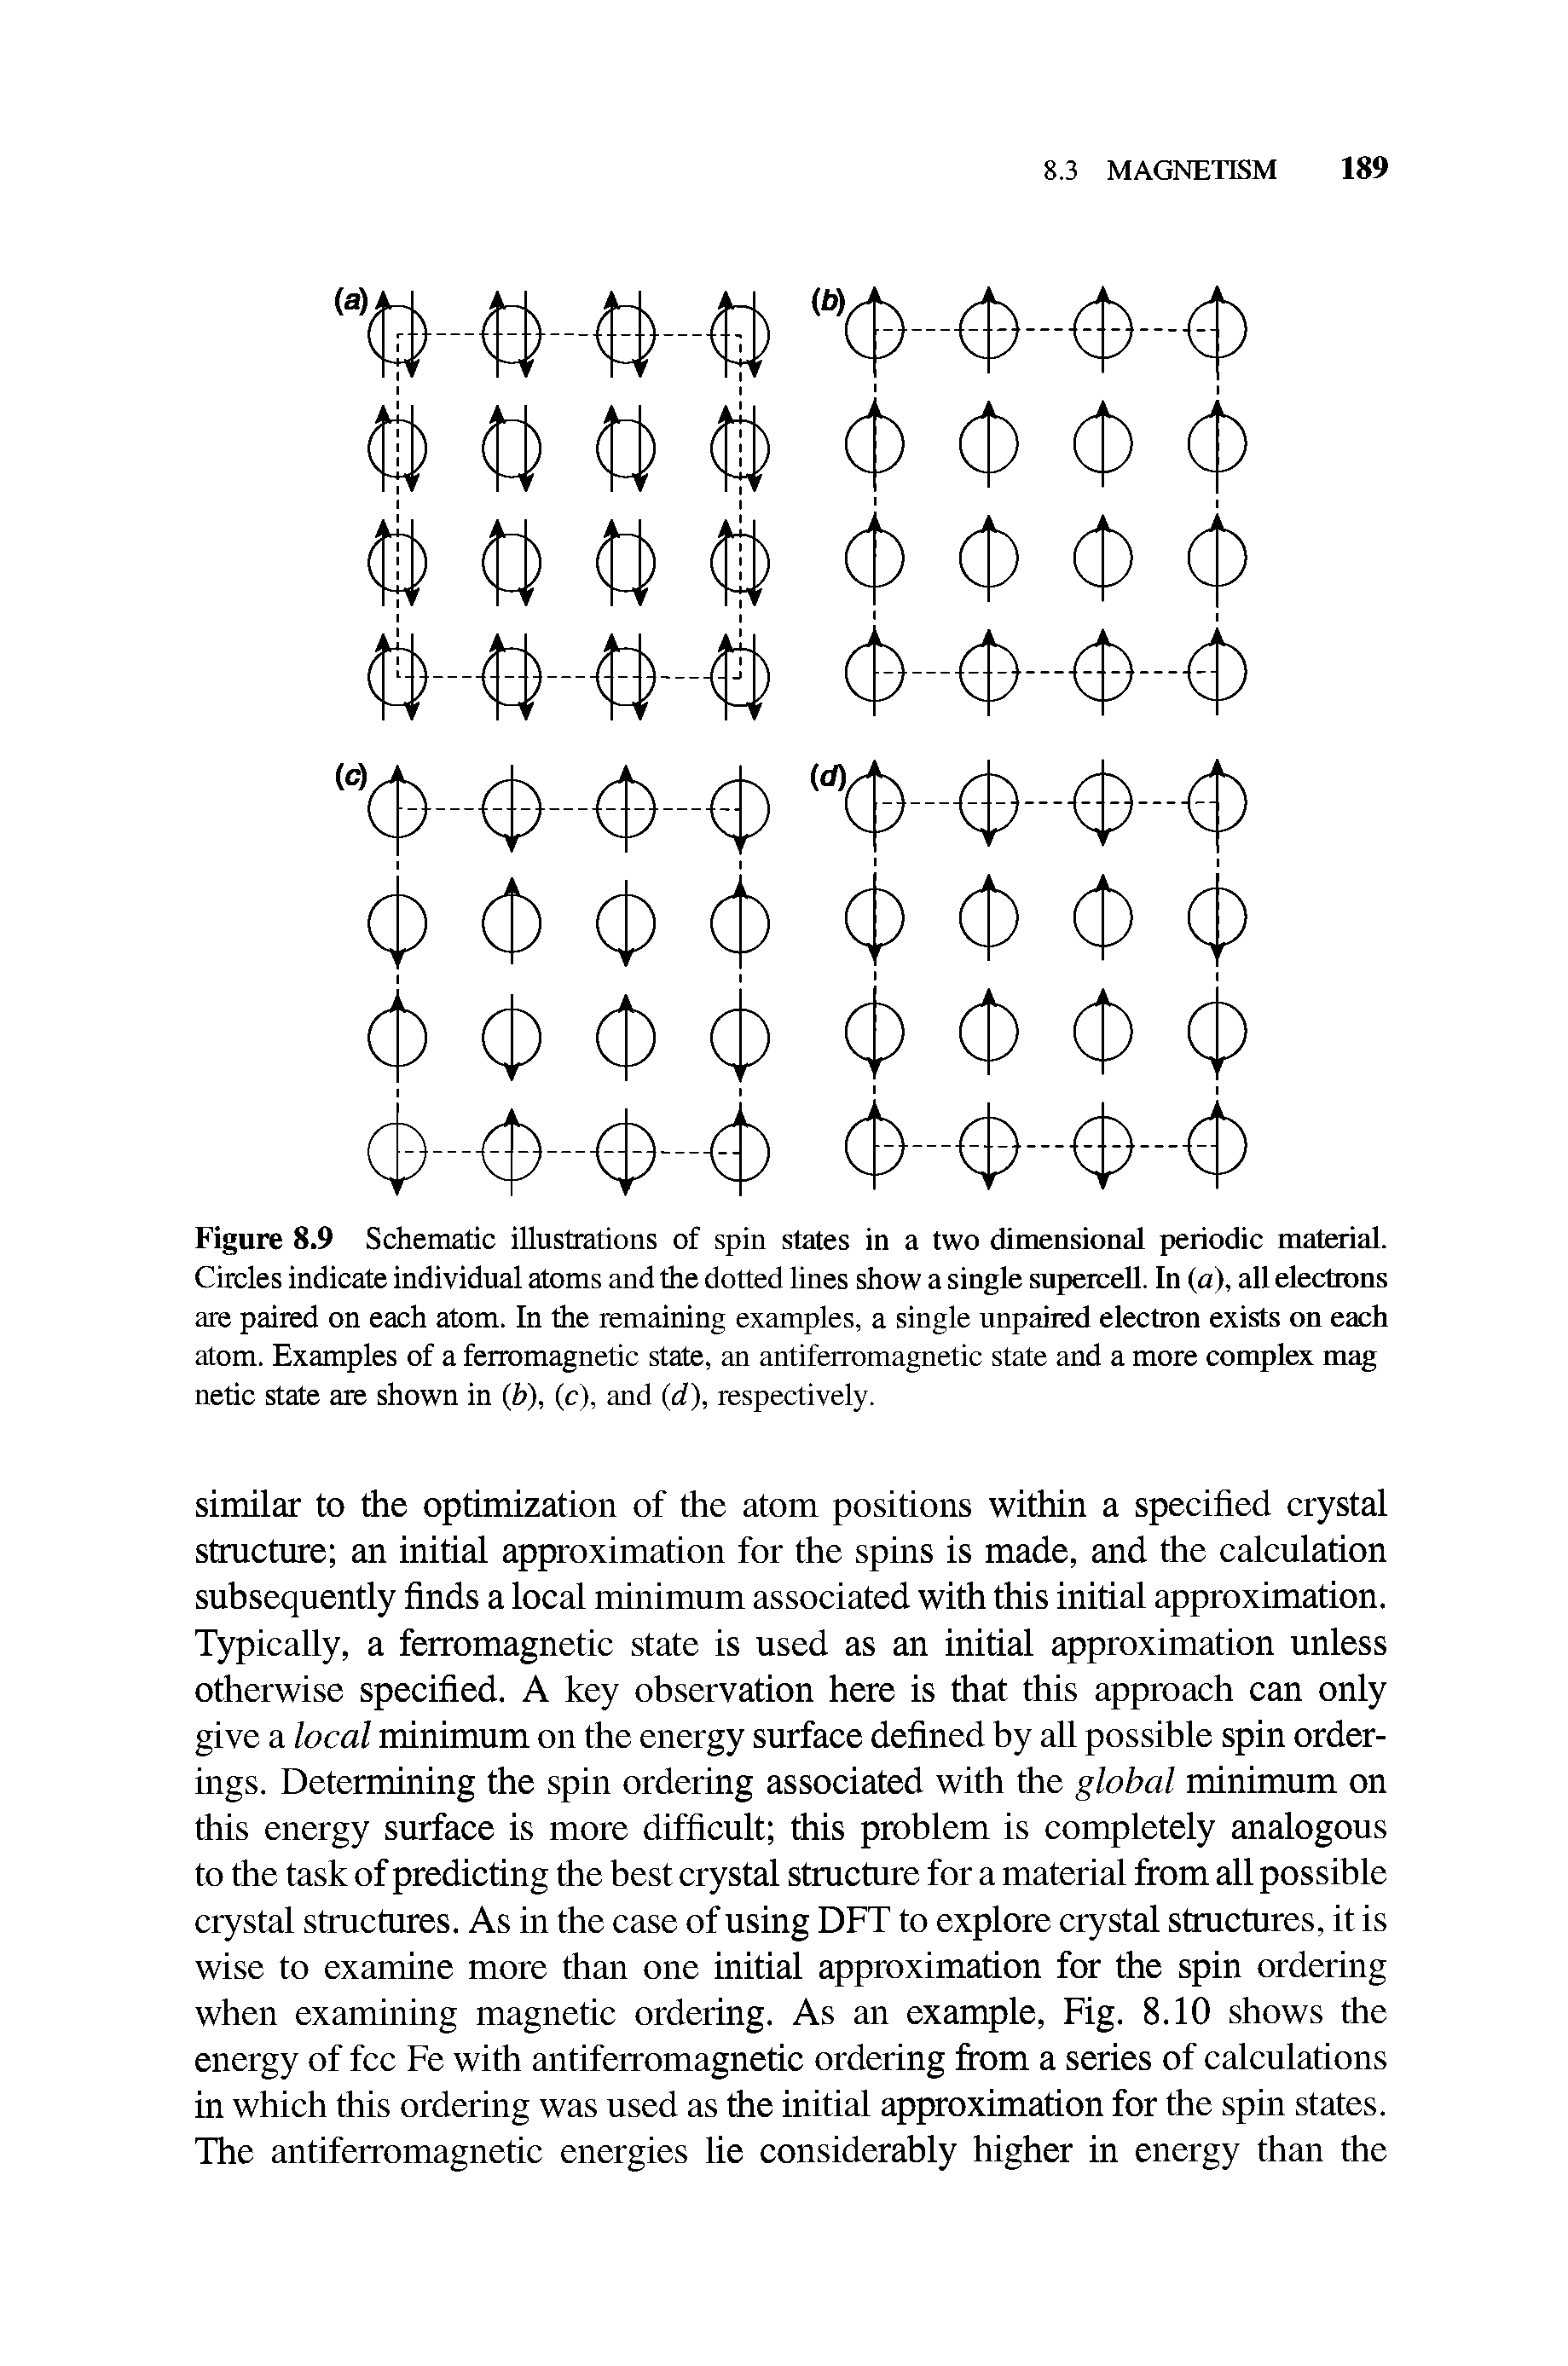 Figure 8.9 Schematic illustrations of spin states in a two dimensional periodic material. Circles indicate individual atoms and the dotted lines show a single supercell. In (a), all electrons are paired on each atom. In the remaining examples, a single unpaired electron exists on each atom. Examples of a ferromagnetic state, an antiferromagnetic state and a more complex mag netic state are shown in (b), (c), and (d), respectively.